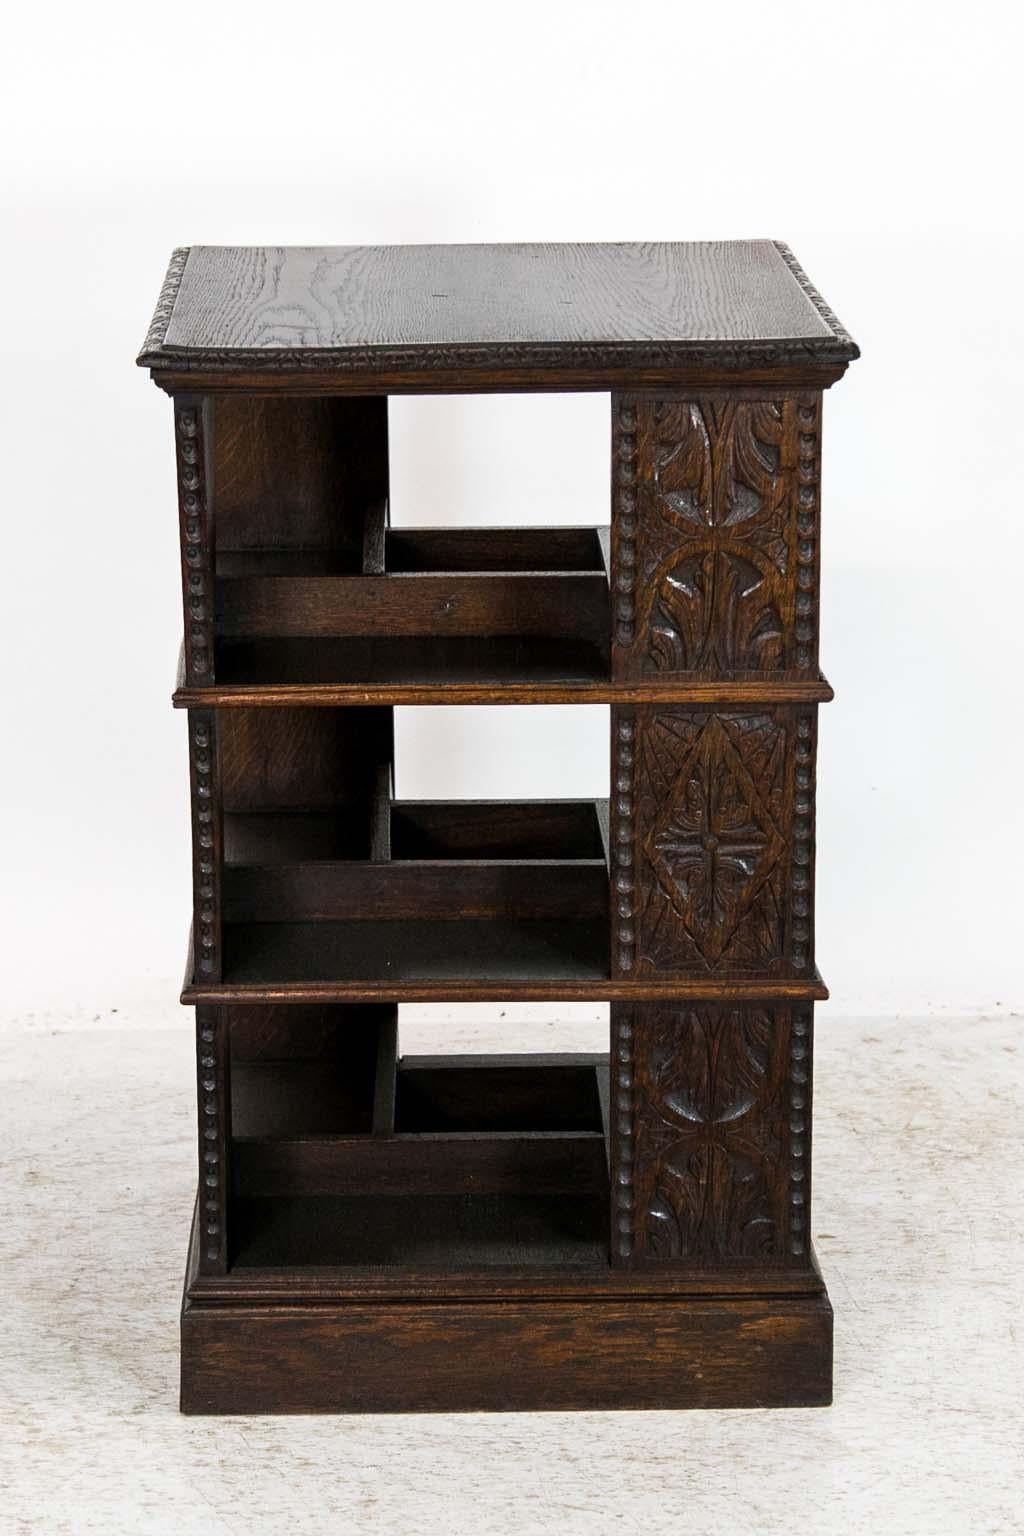 The top of this carved oak bookstand has a carved edge molding. The three support columns on each side are carved with leaves and stylized fans. The shelf dividers have applied shaped moldings.
  